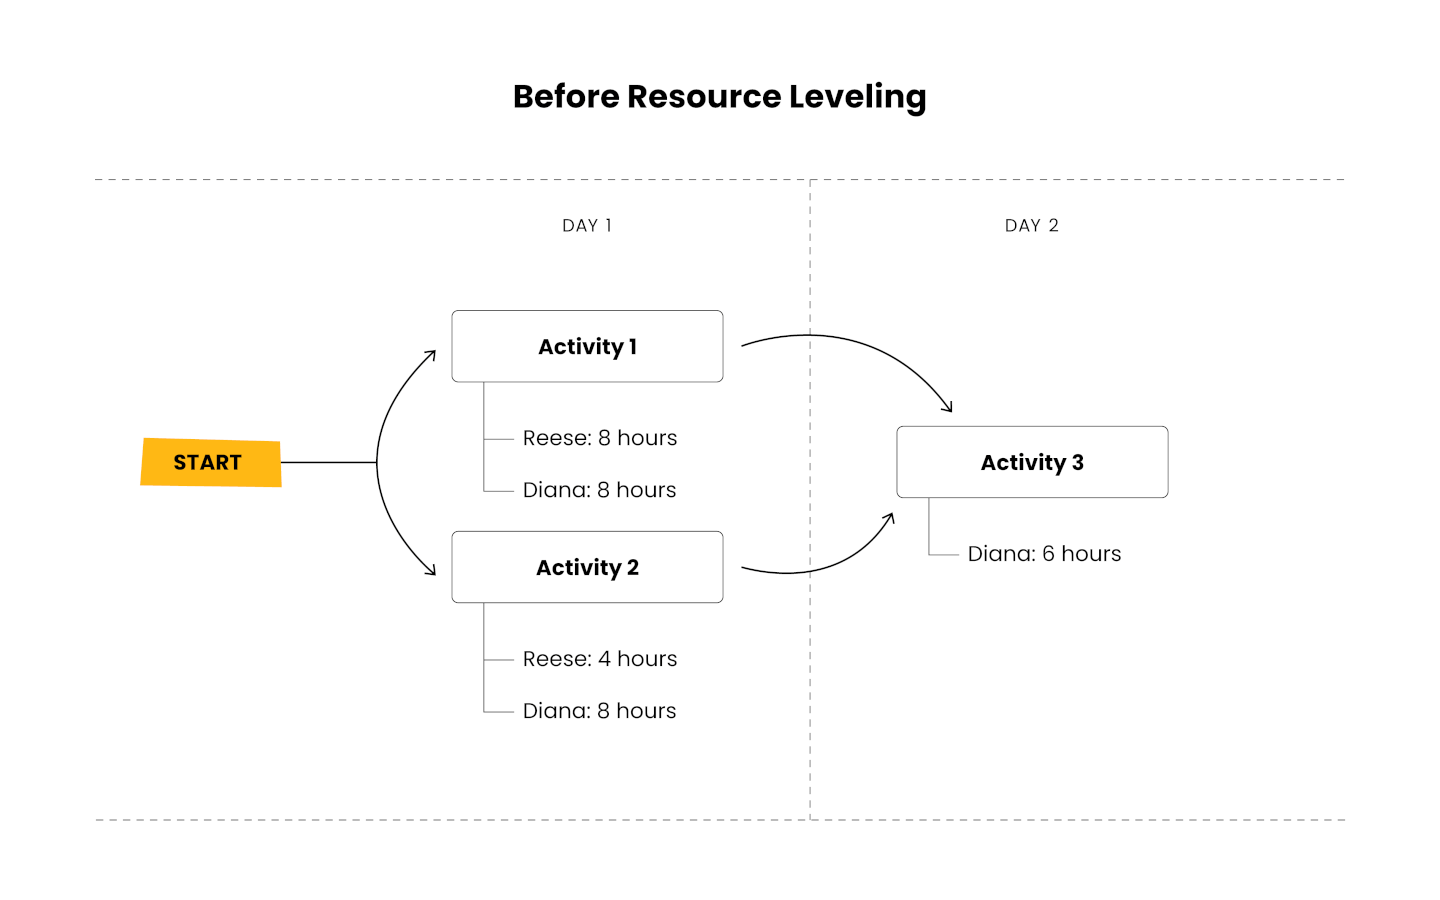 diagram showing time allocation for two employees and three activities over two days